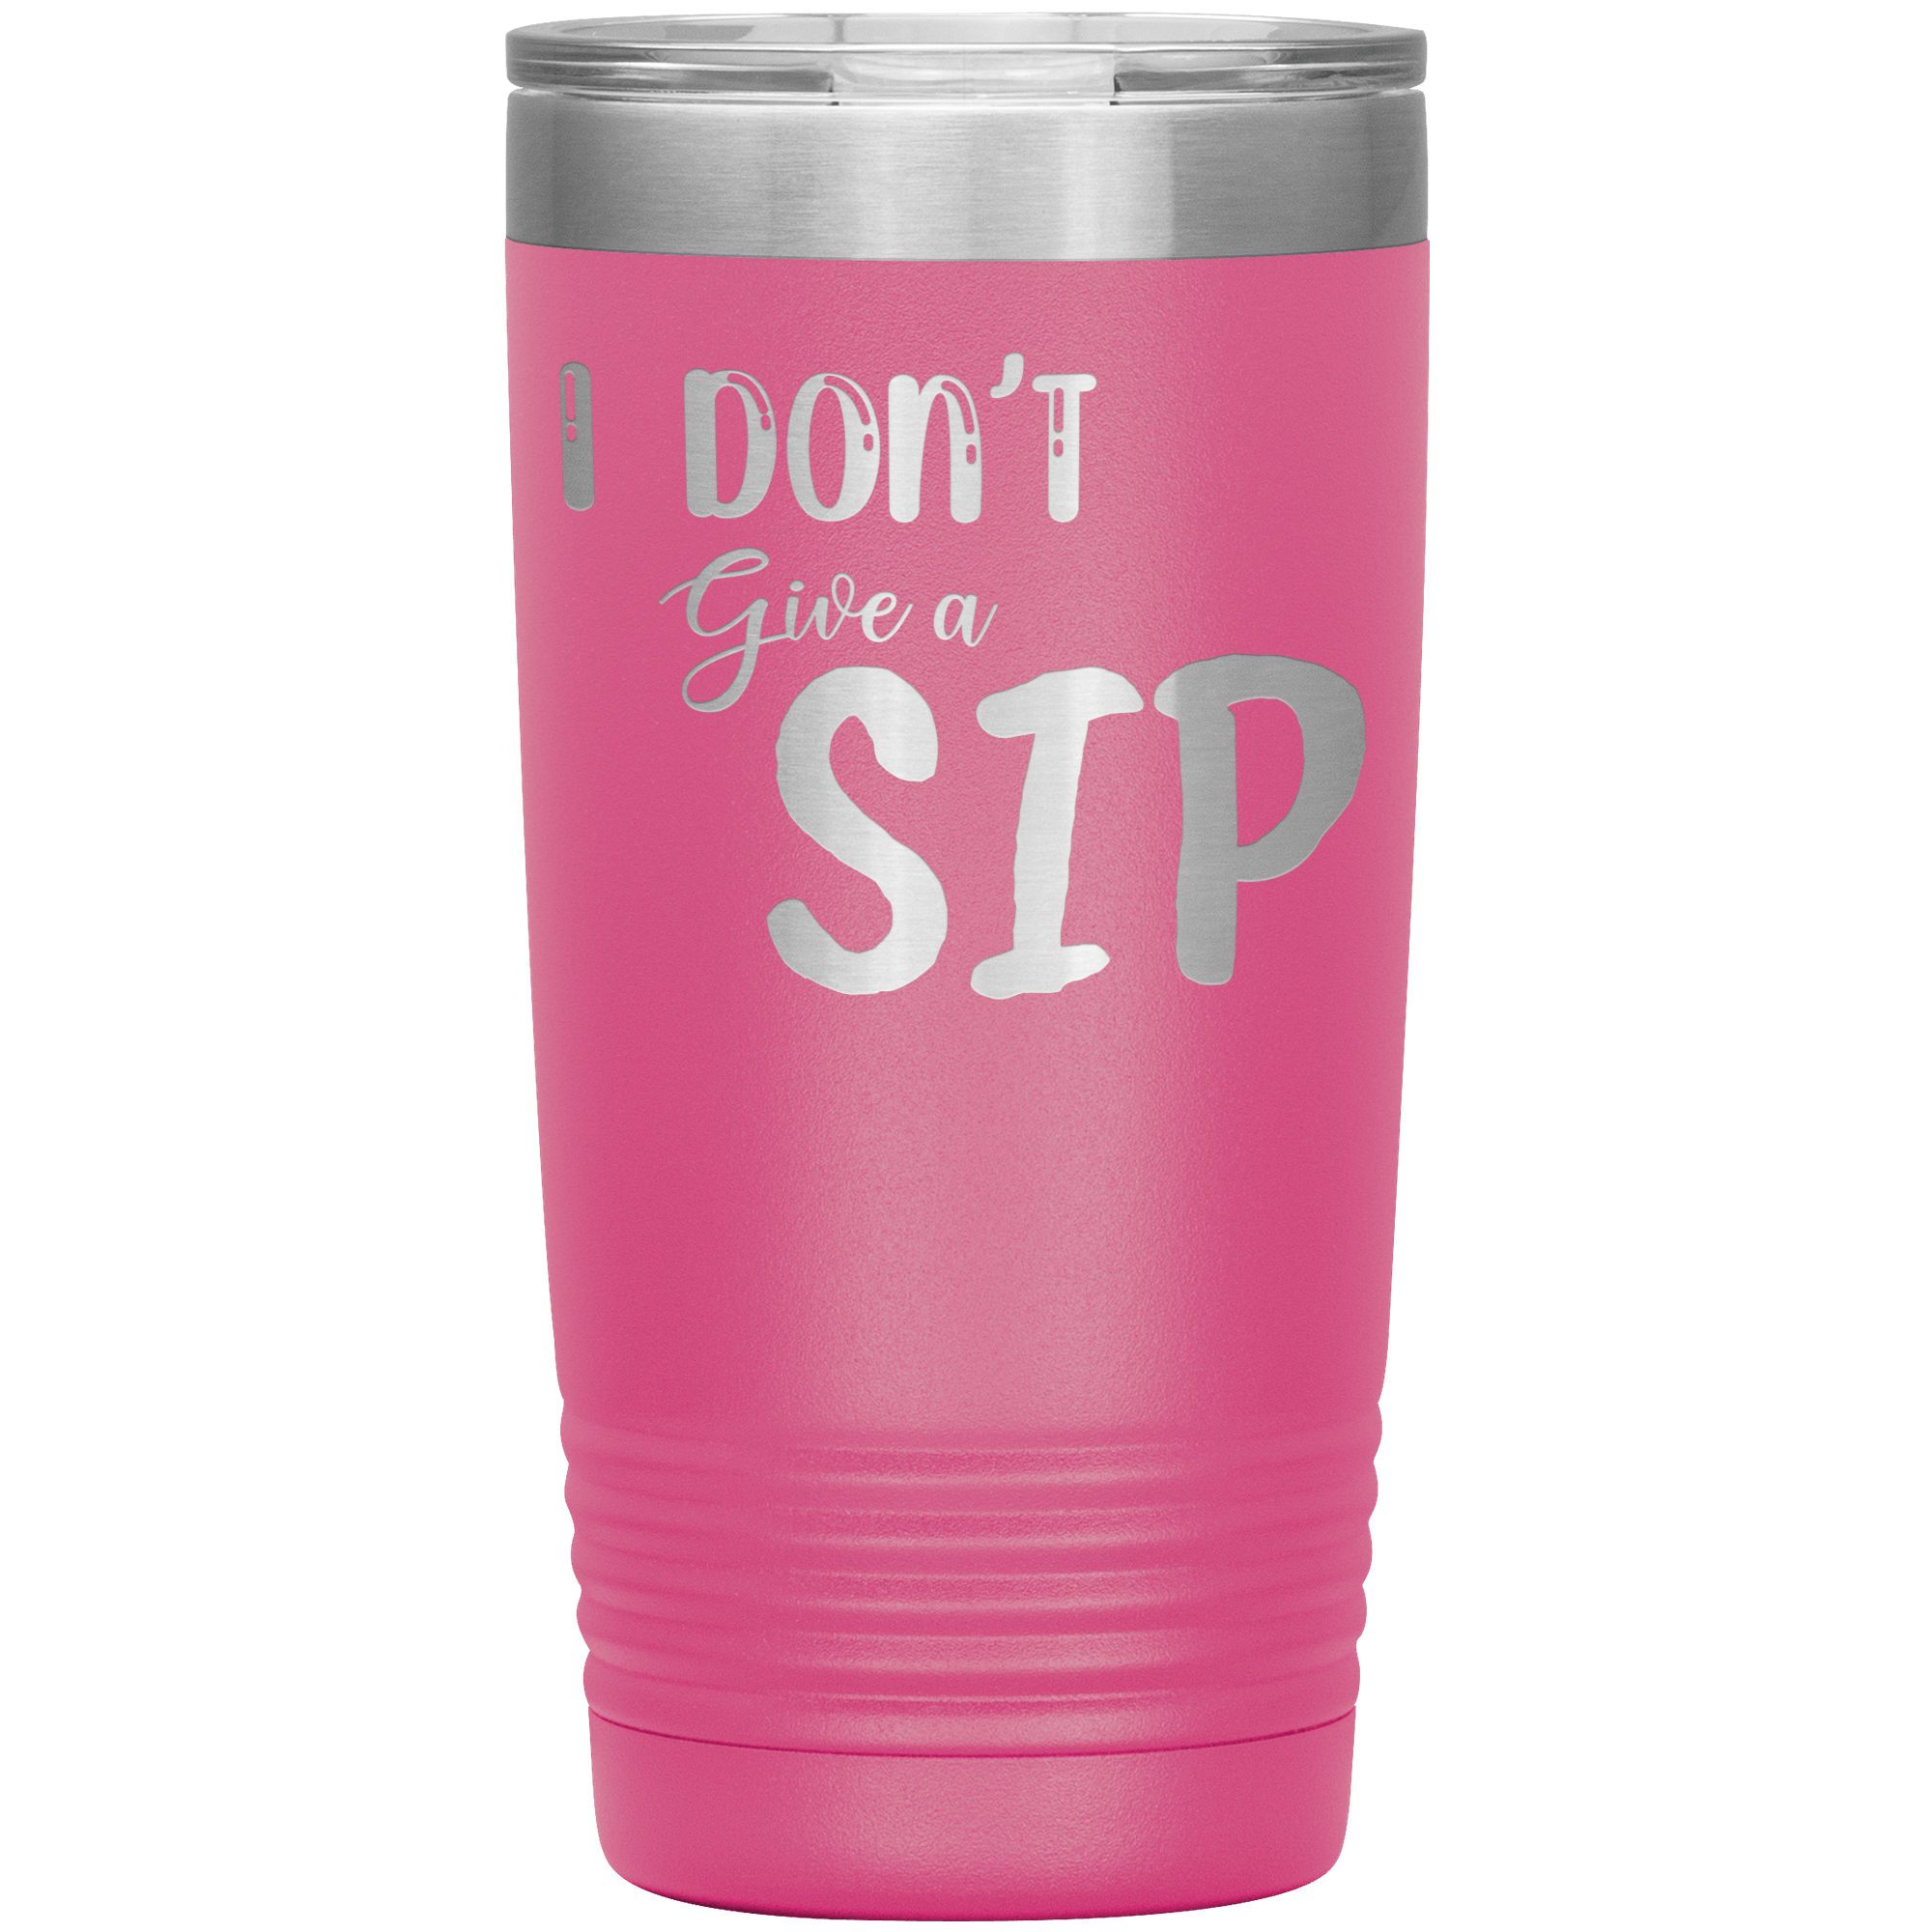 I DON'T GIVE A SIP - TUMBLER